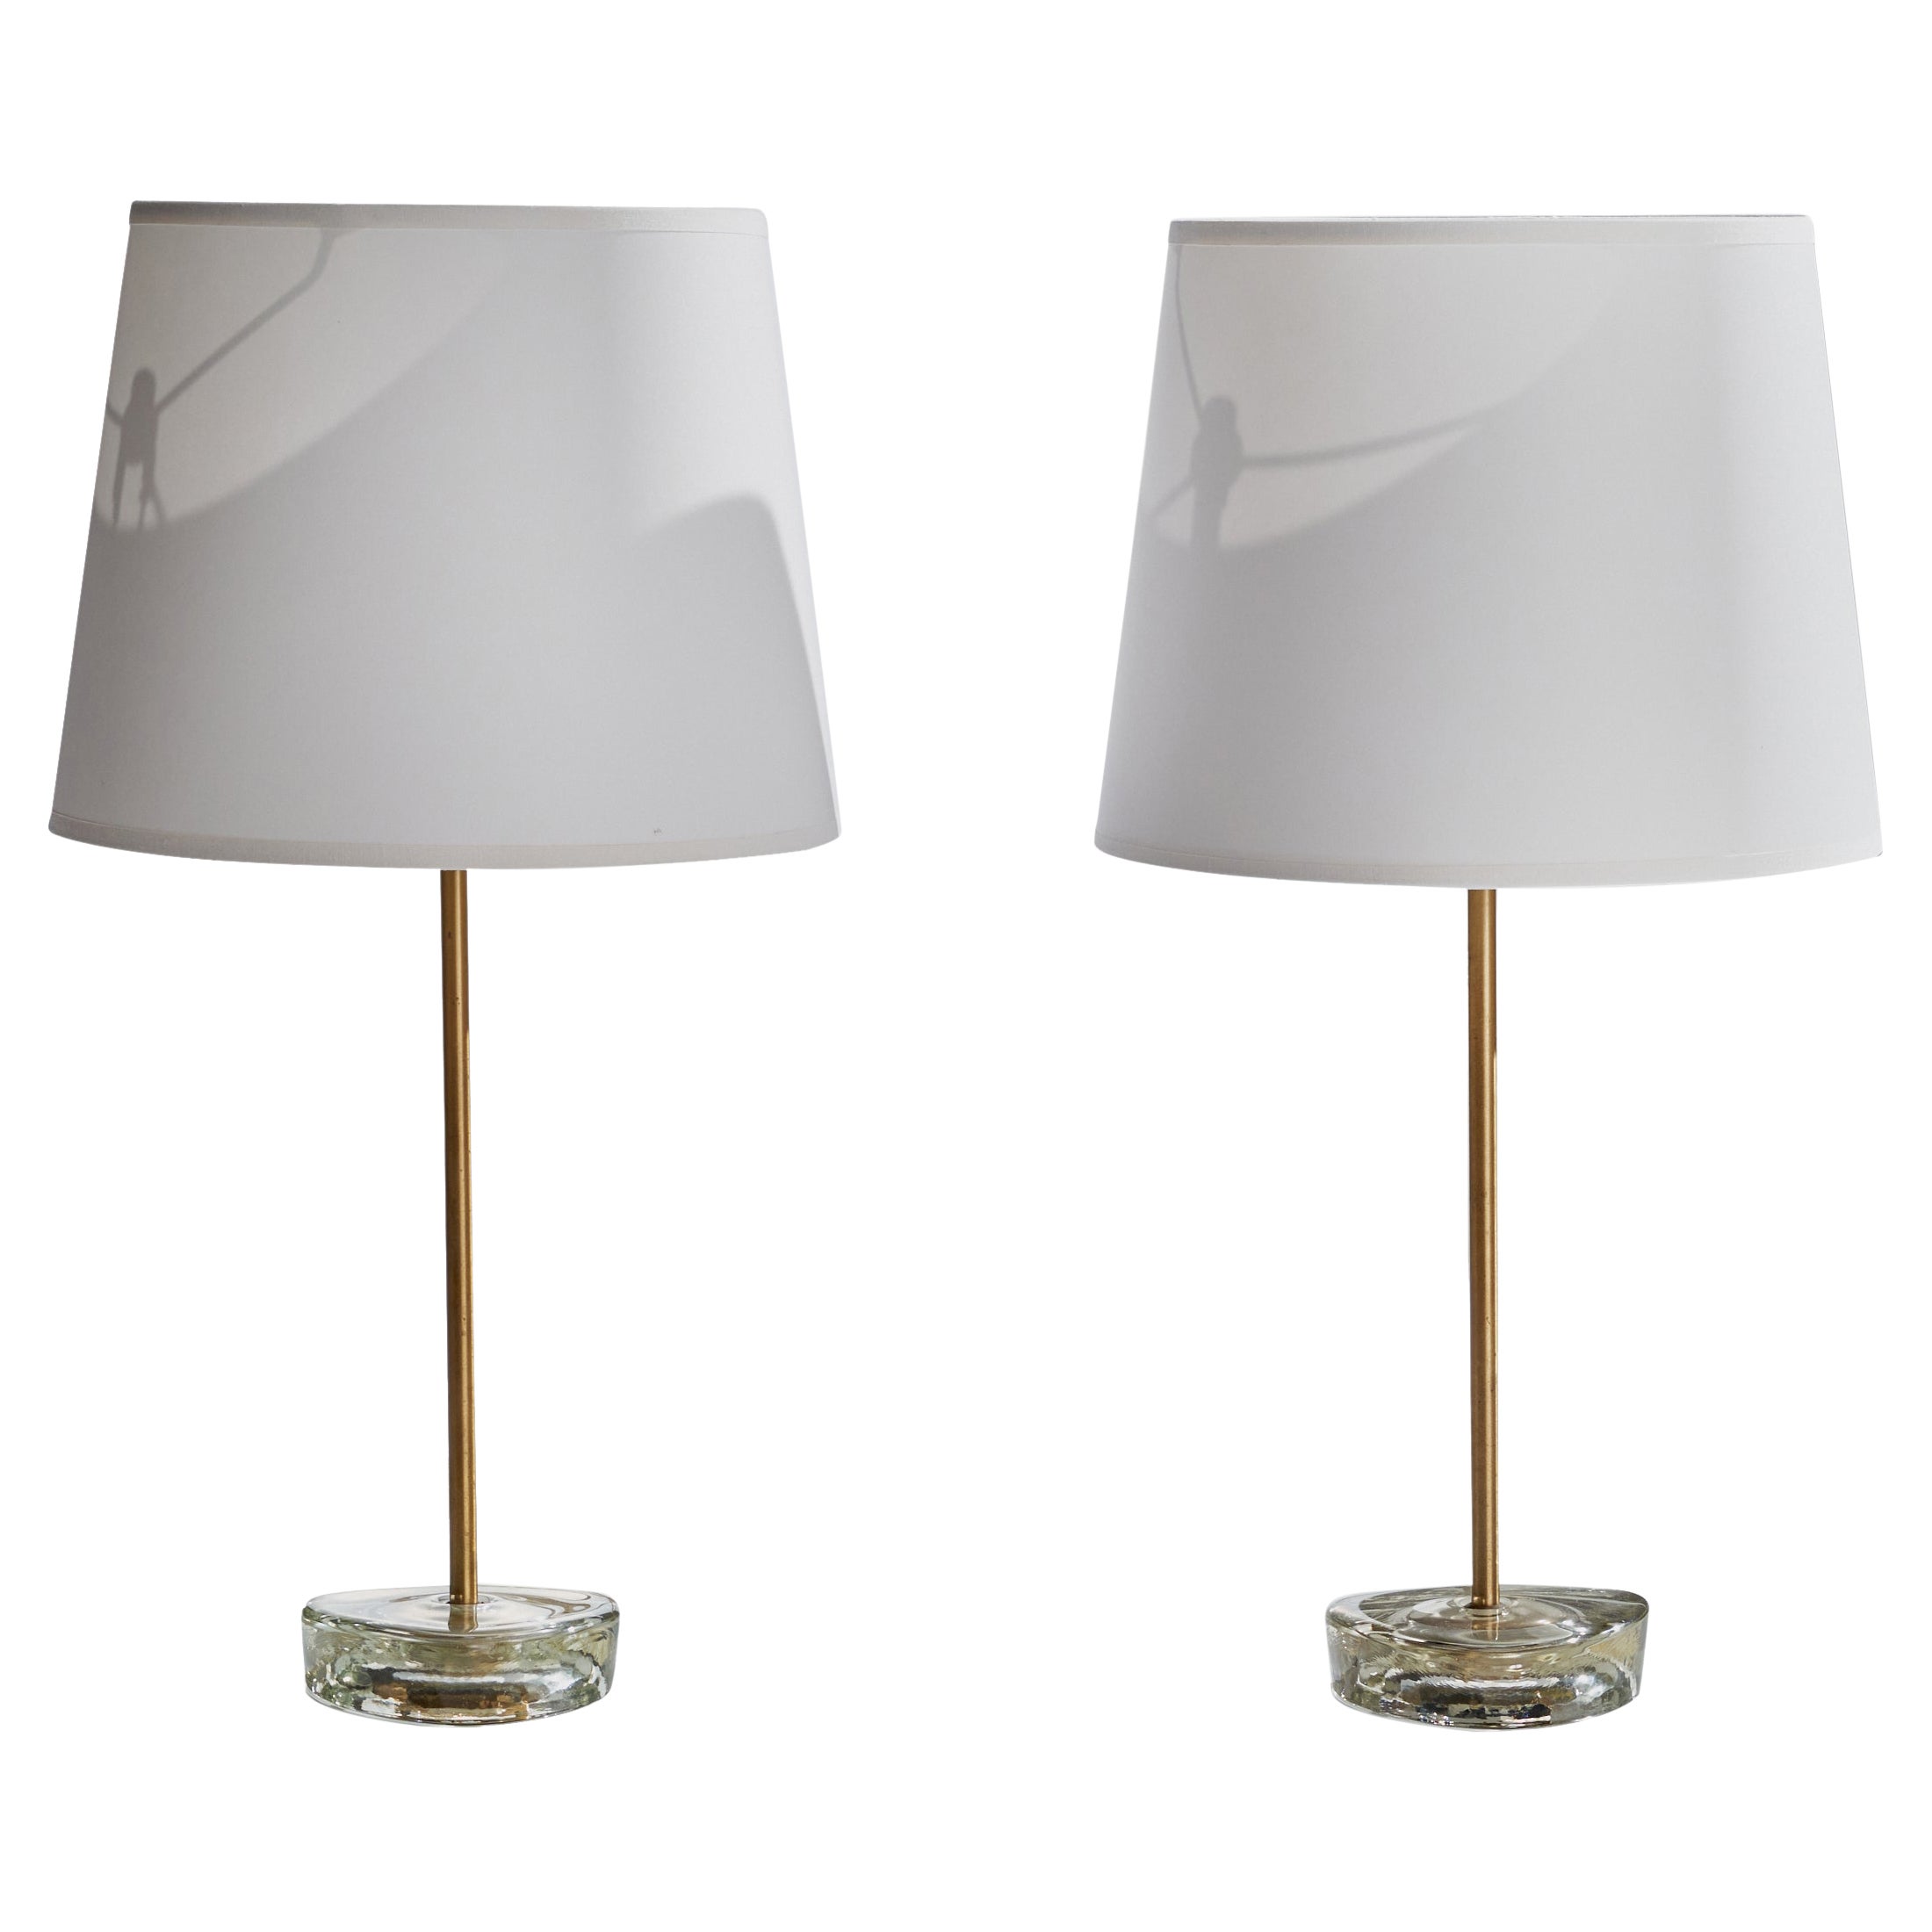 Nybro Armaturfabrik, Table Lamps, Brass, Glass, Sweden, 1960s For Sale